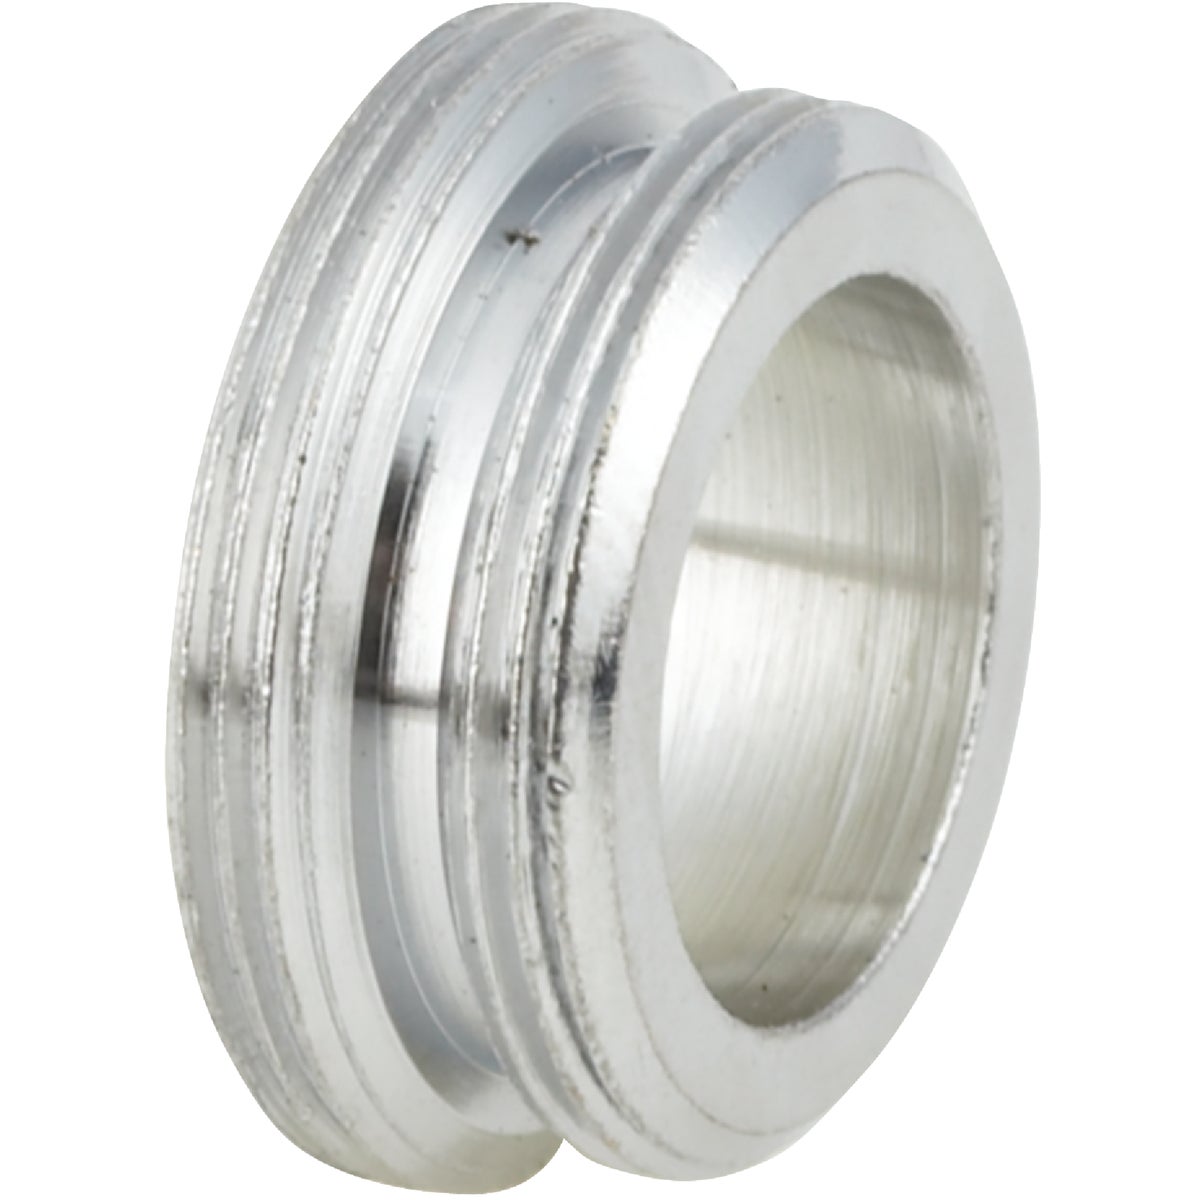 Item 406215, Converts standard (15/16-27) Female faucet thread to standard (55/64-27) 